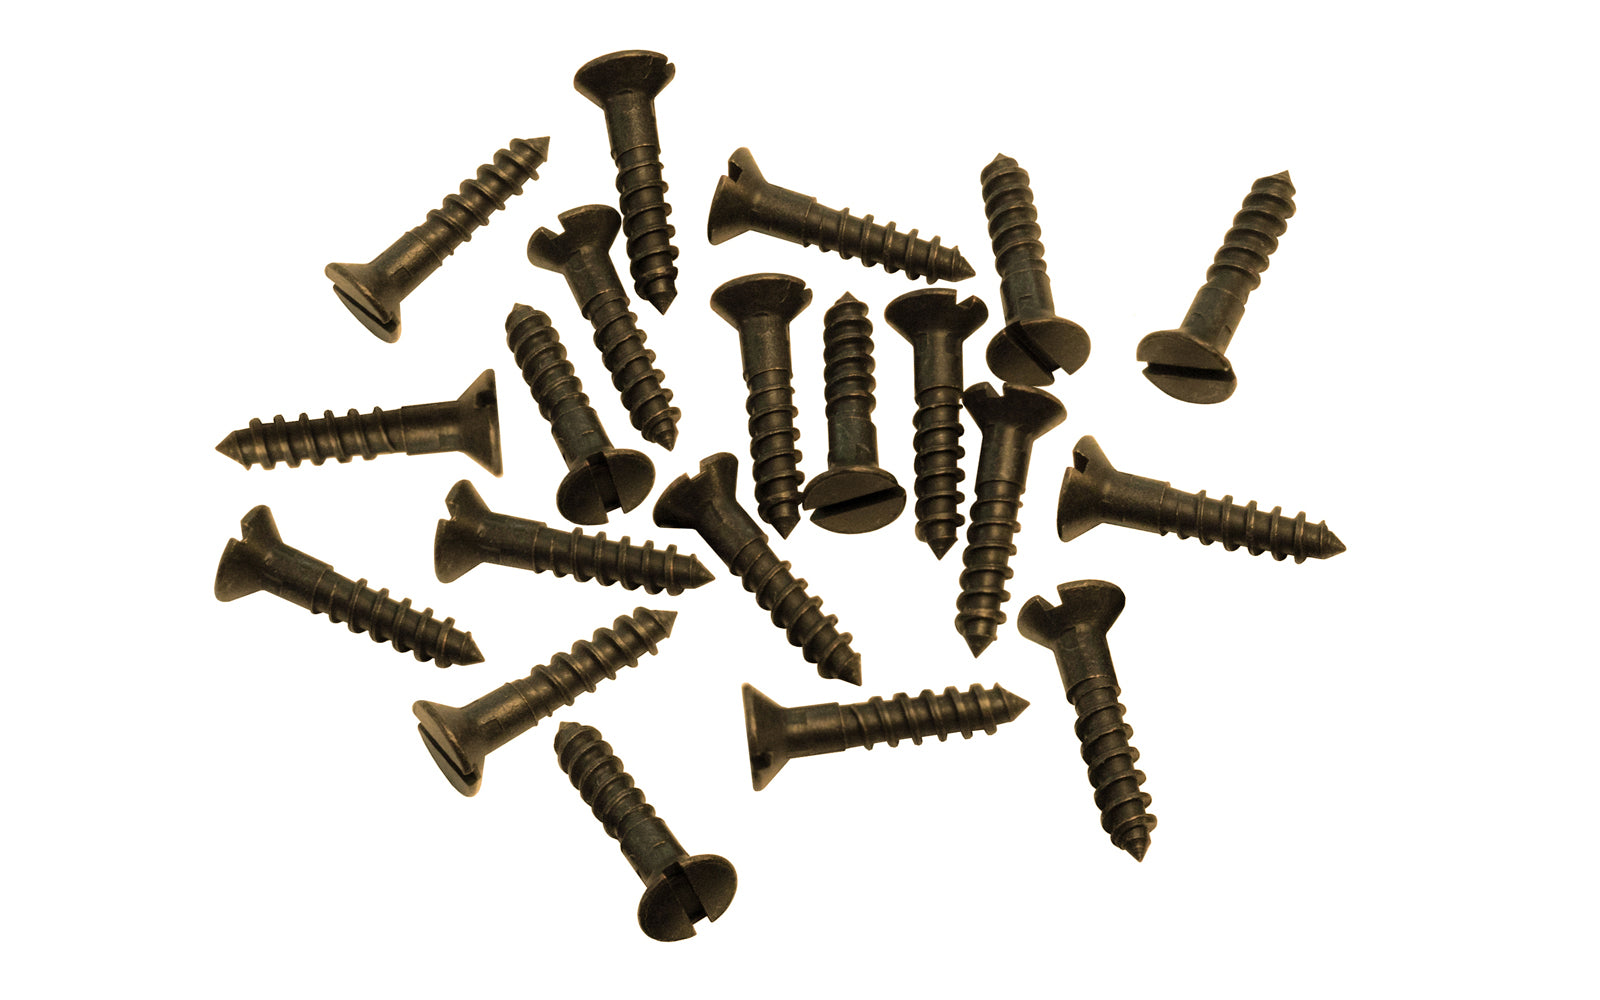 Solid Brass #5 x 5/8" Flat Head Slotted Wood Screws. Traditional & classic vintage-style countersunk wood screws. Sold as 20 pieces in a bag. Slotted-Head. Antique Brass Finish